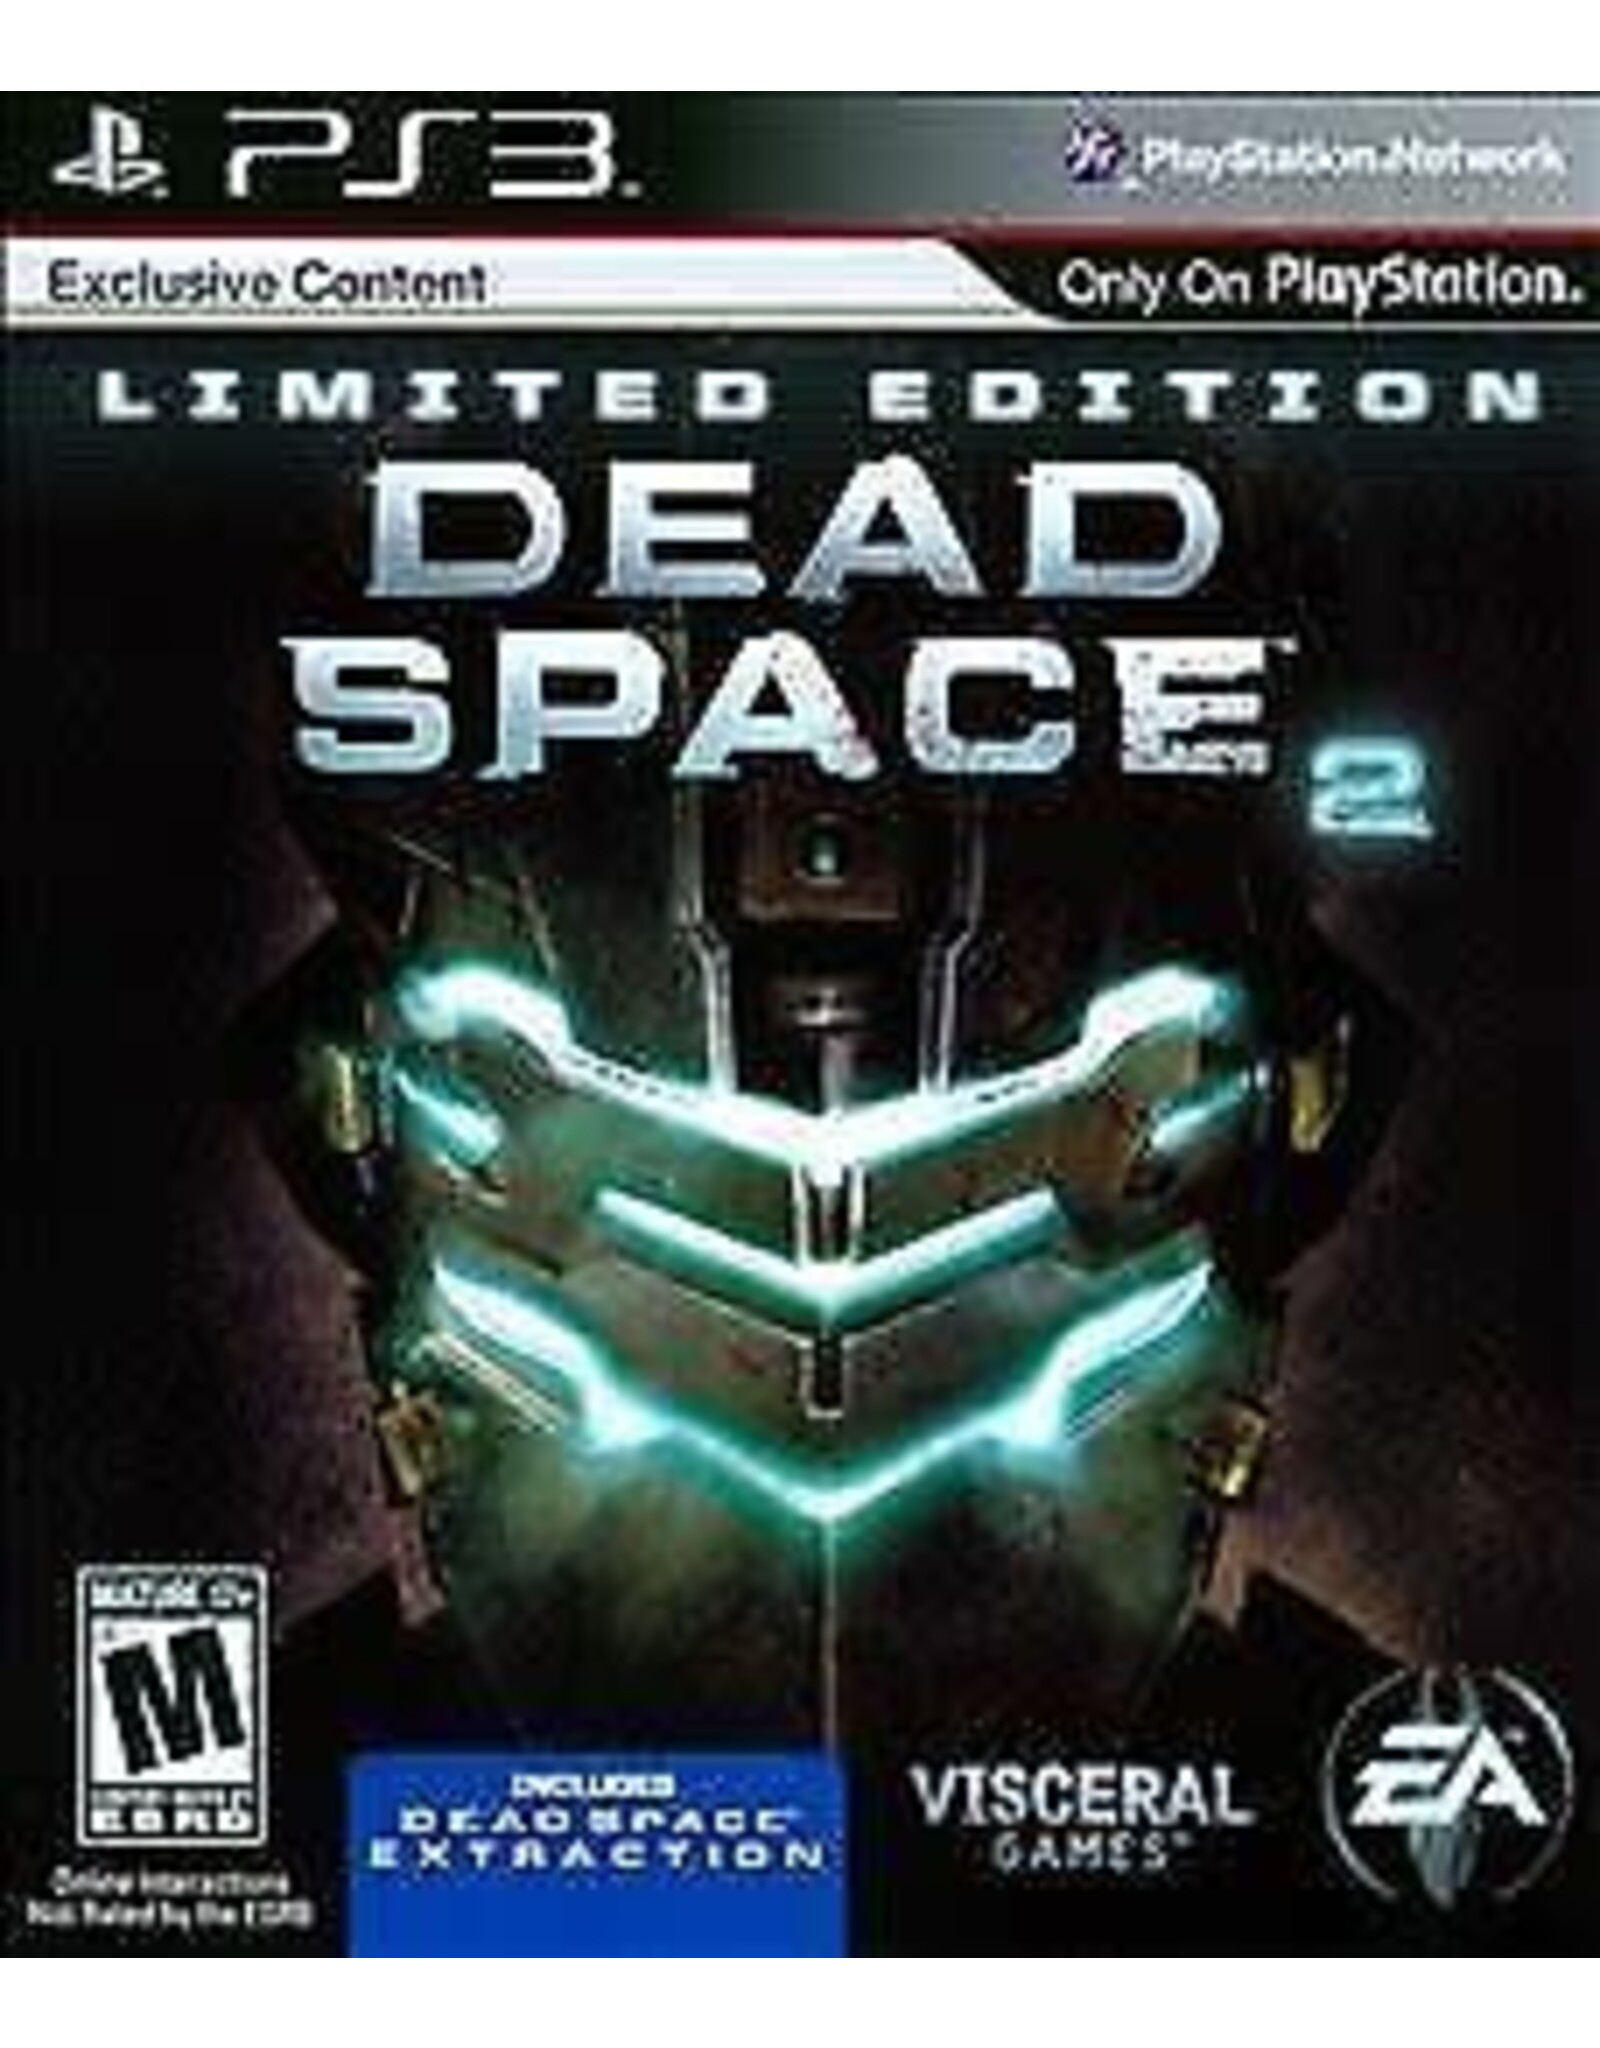 Playstation 3 Dead Space 2 Limited Edition (Used)